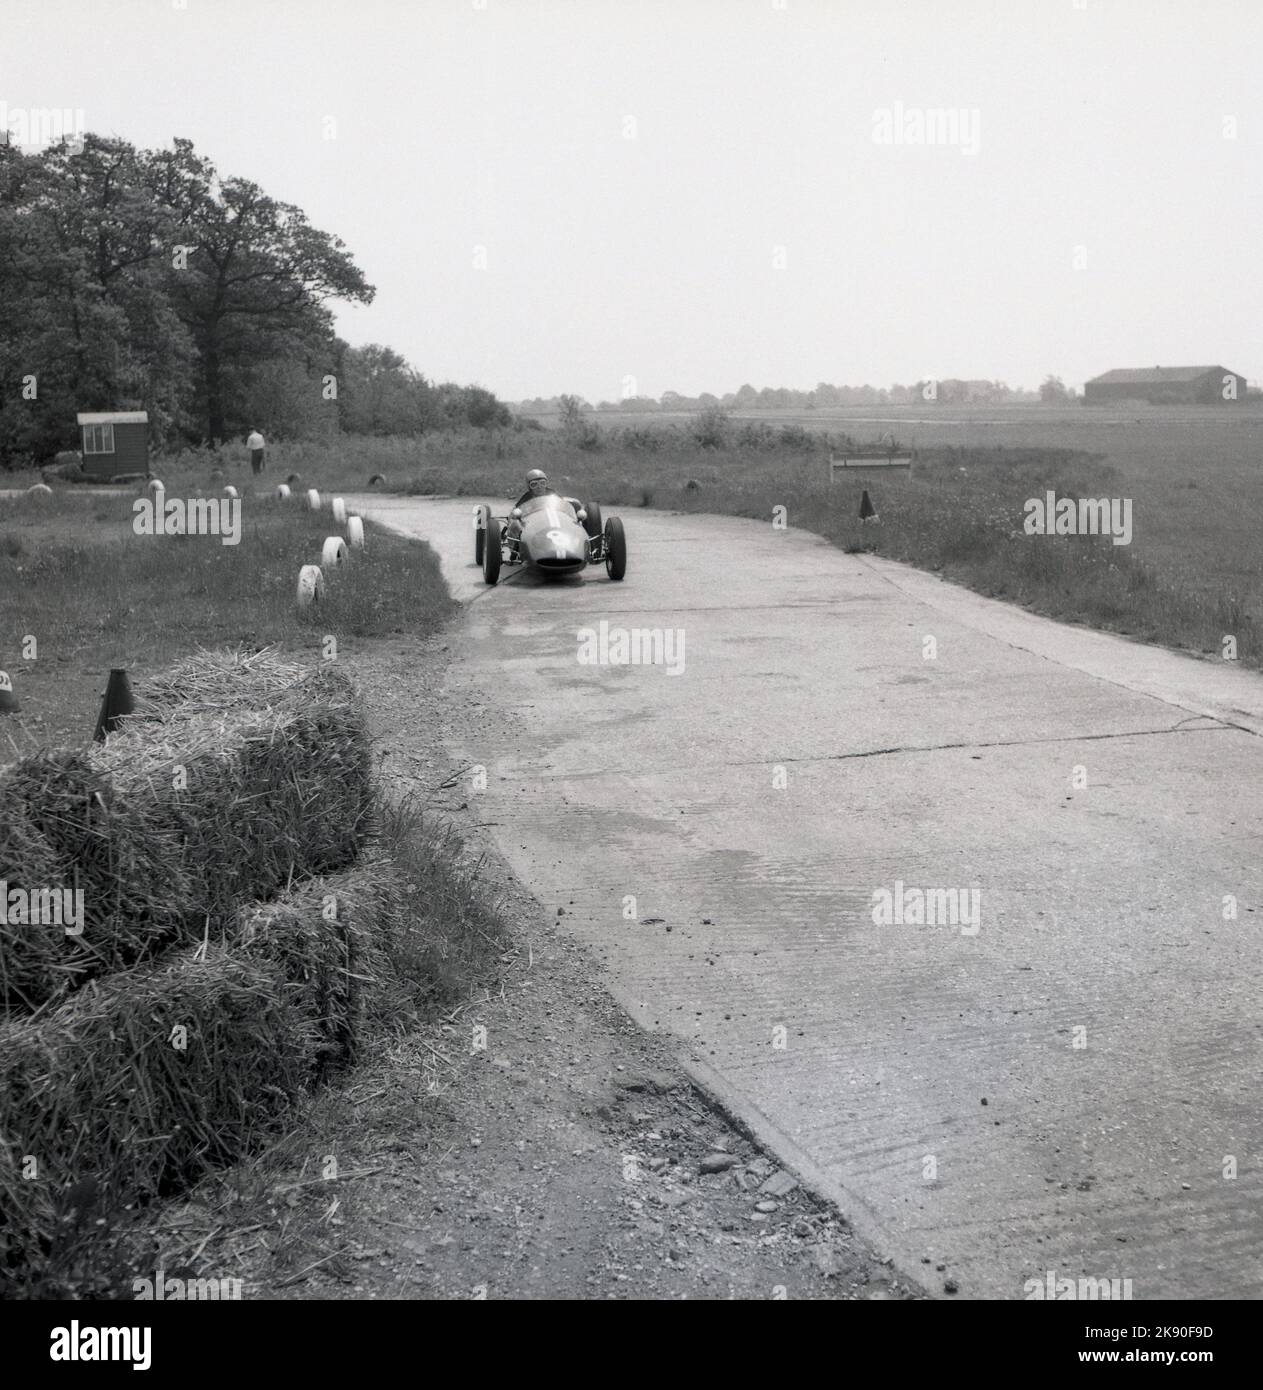 1962, historical, a single-seater racing car on the track, the perimeter road,  at the Finmere Aerodome, a disused RAF airfield near to Buckingham, England, UK, home to Geoff Clarke’s Motor Racing Stables. The racing school’s 1,000 cc single-seaters were rear-engined Formula Junior Coopers. Stock Photo